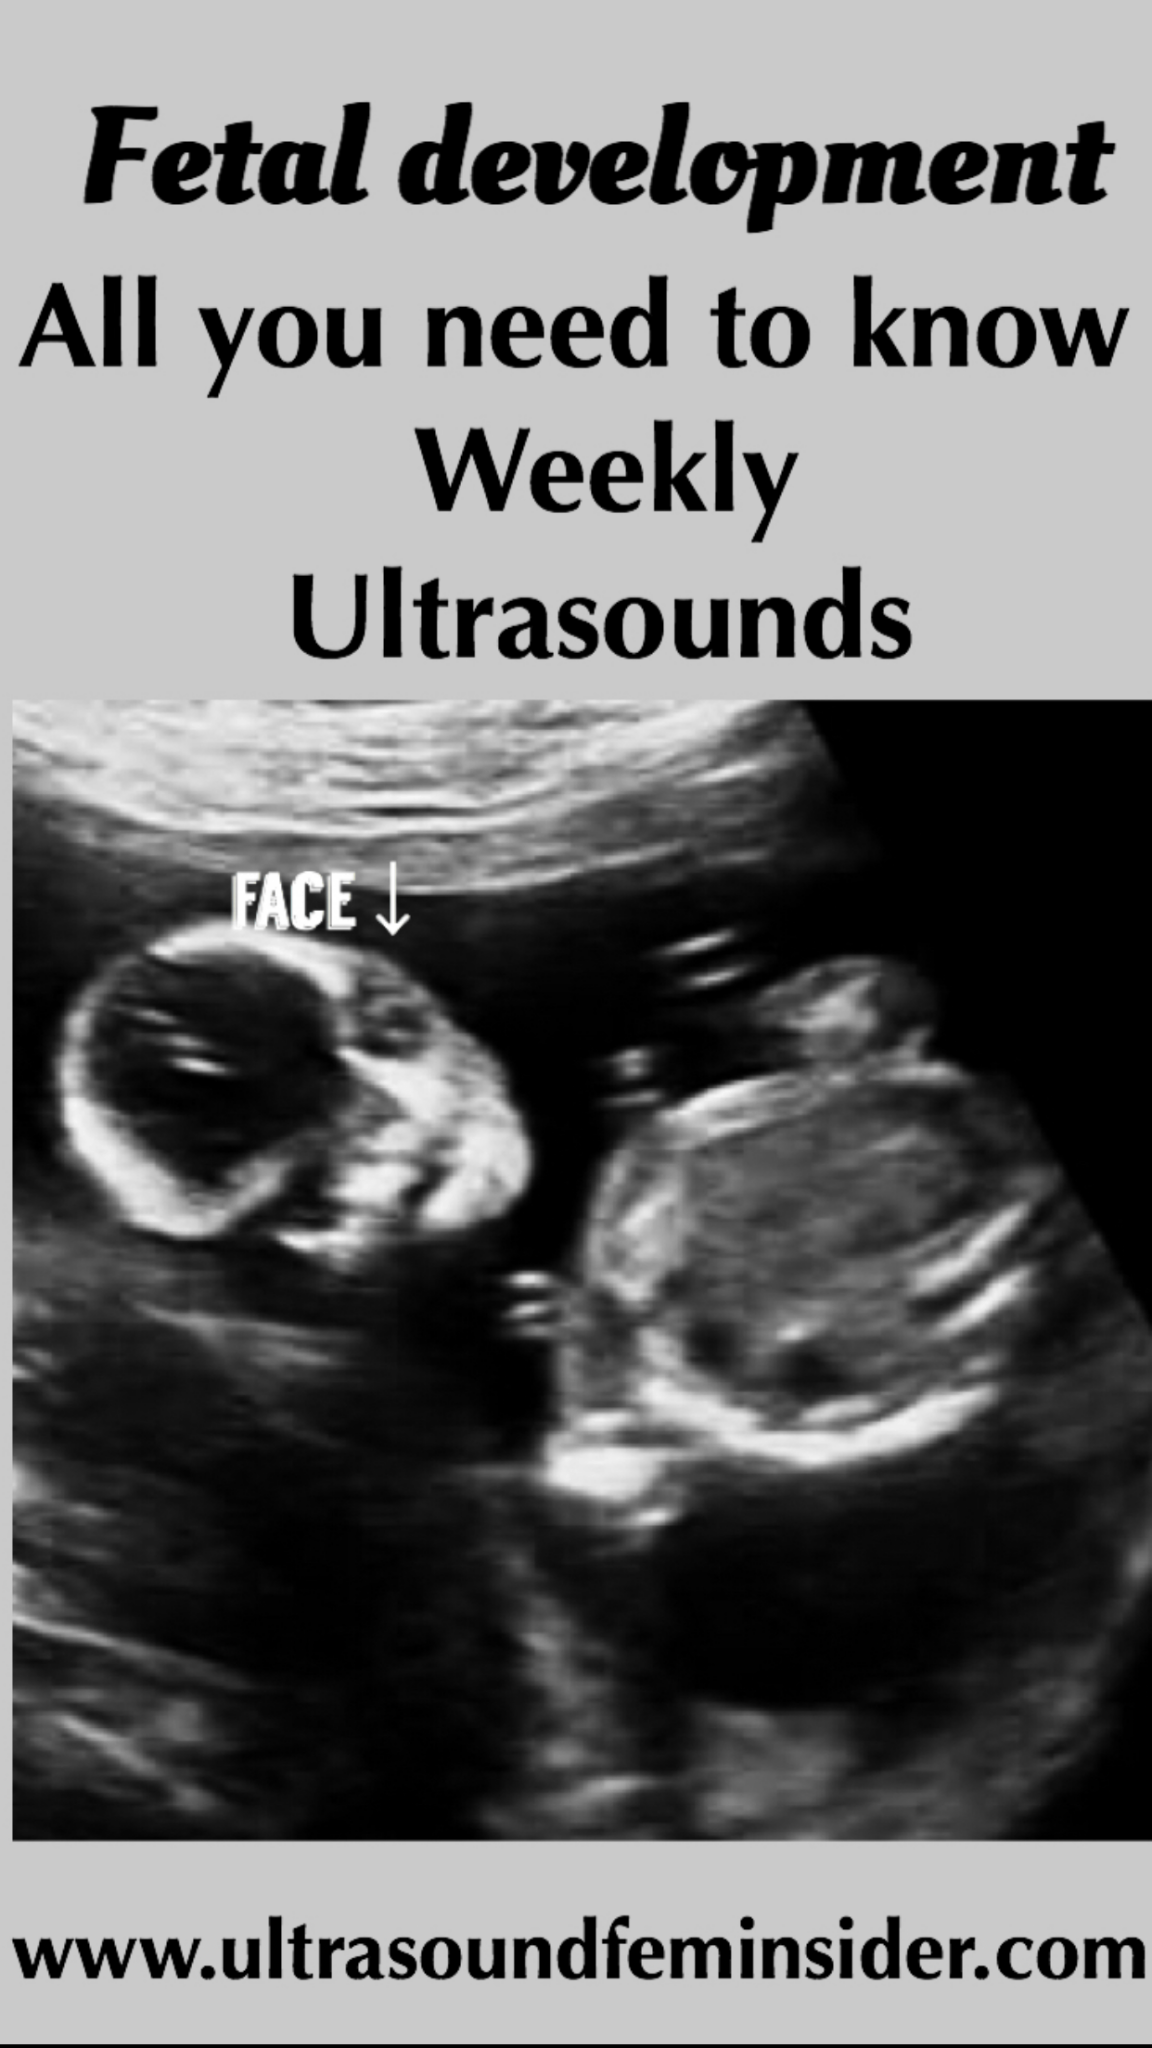 The ultimate guide for your 18 week fetal ultrasounds.